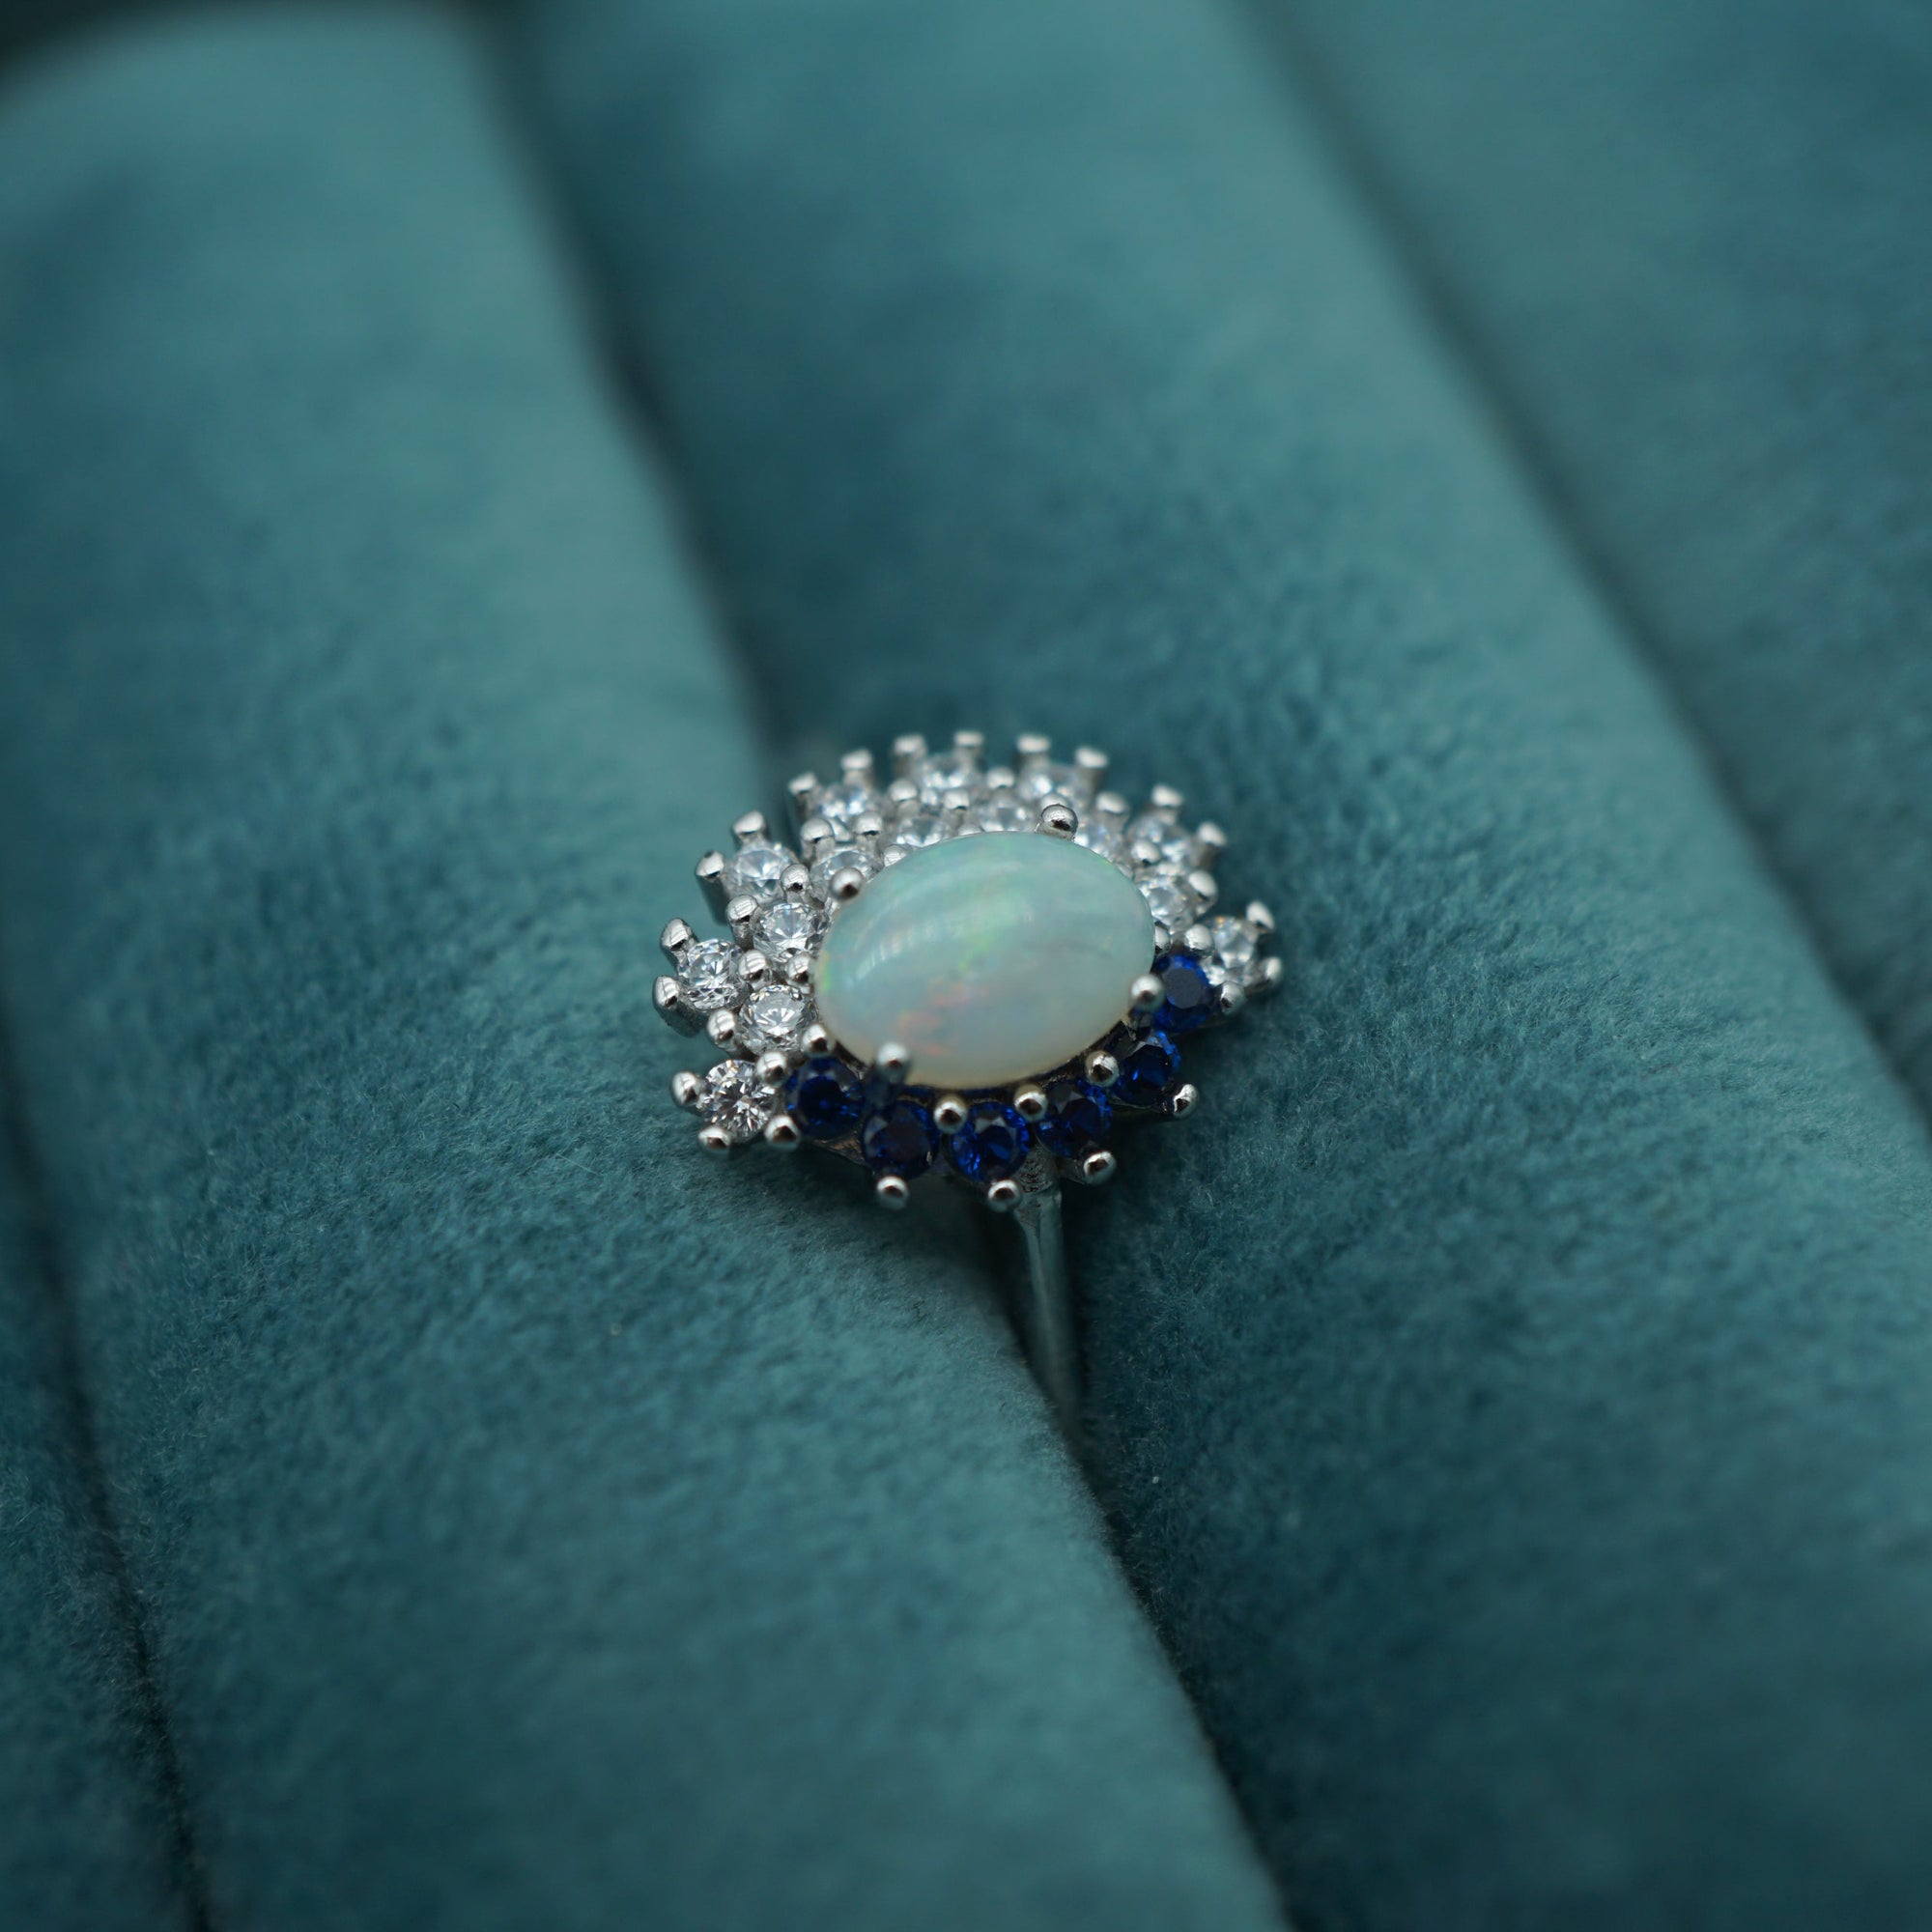 Stunning Australian Solid Crystal Opal Ring, October Birthstone Ring | Stunning Oval Cut Natural-Vsabel Jewellery